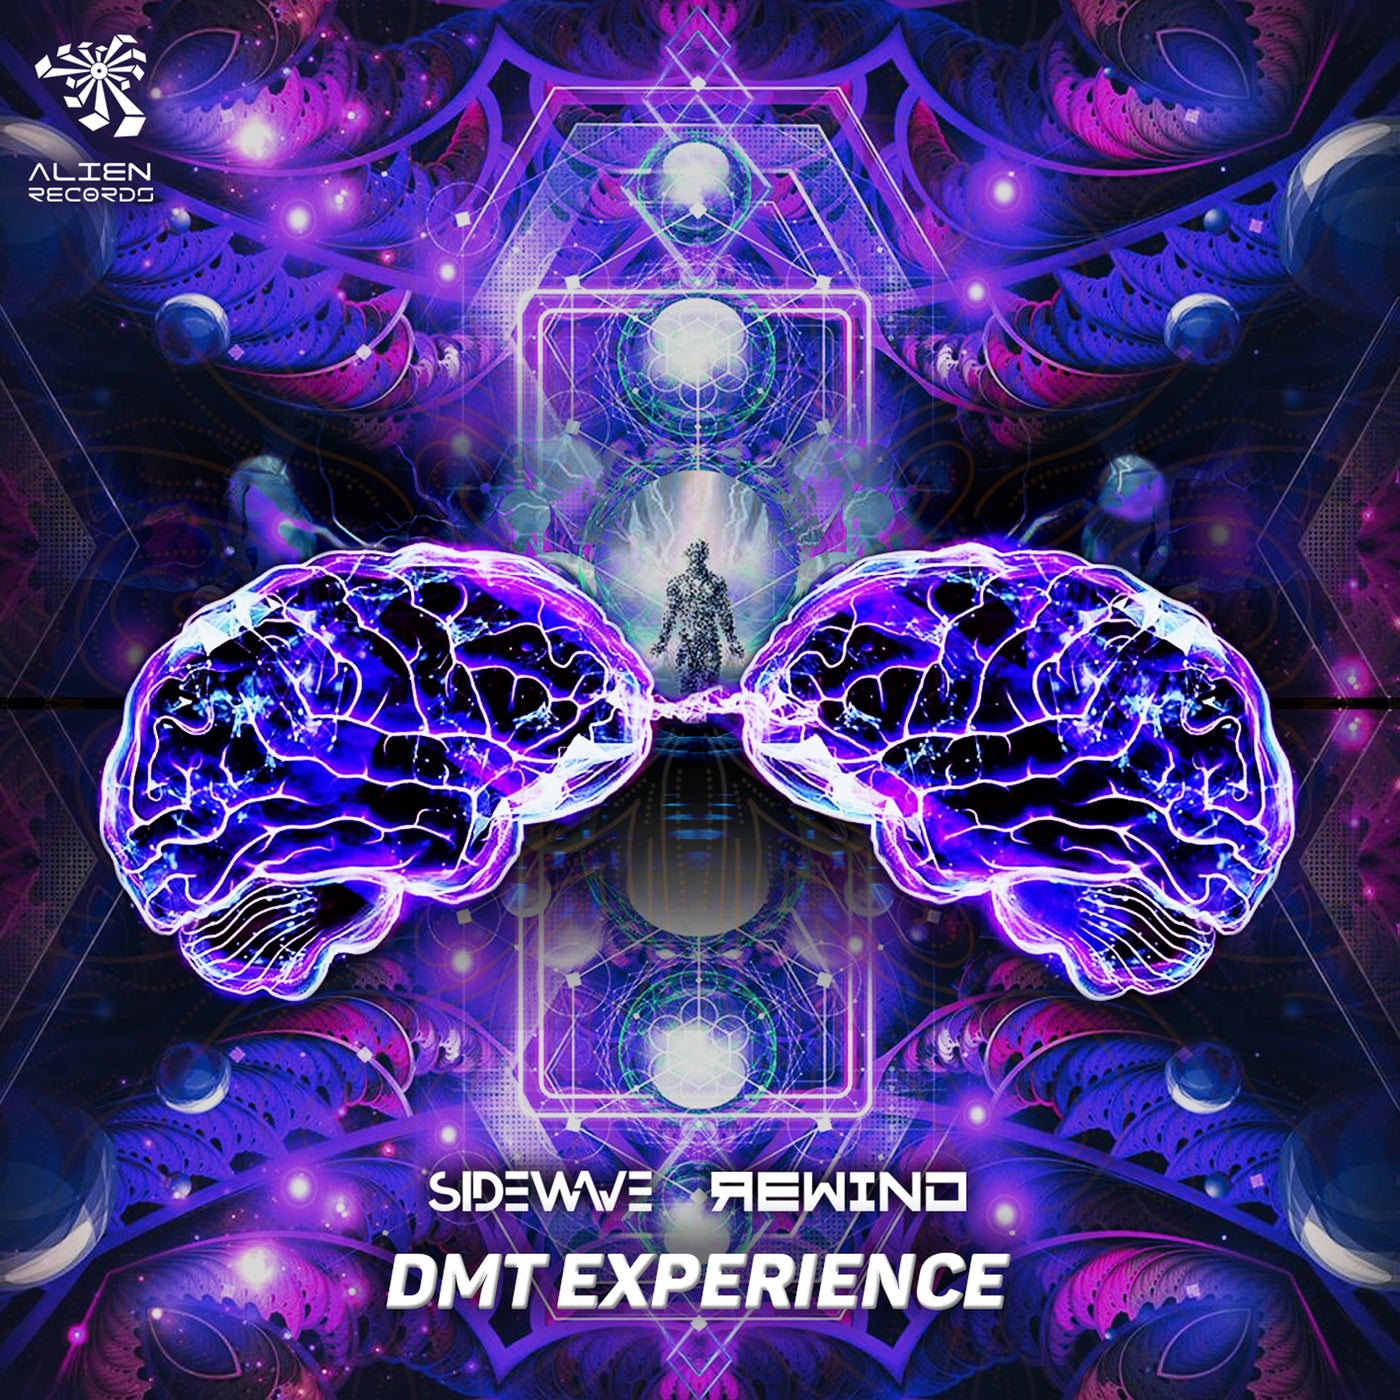 DMT Experience